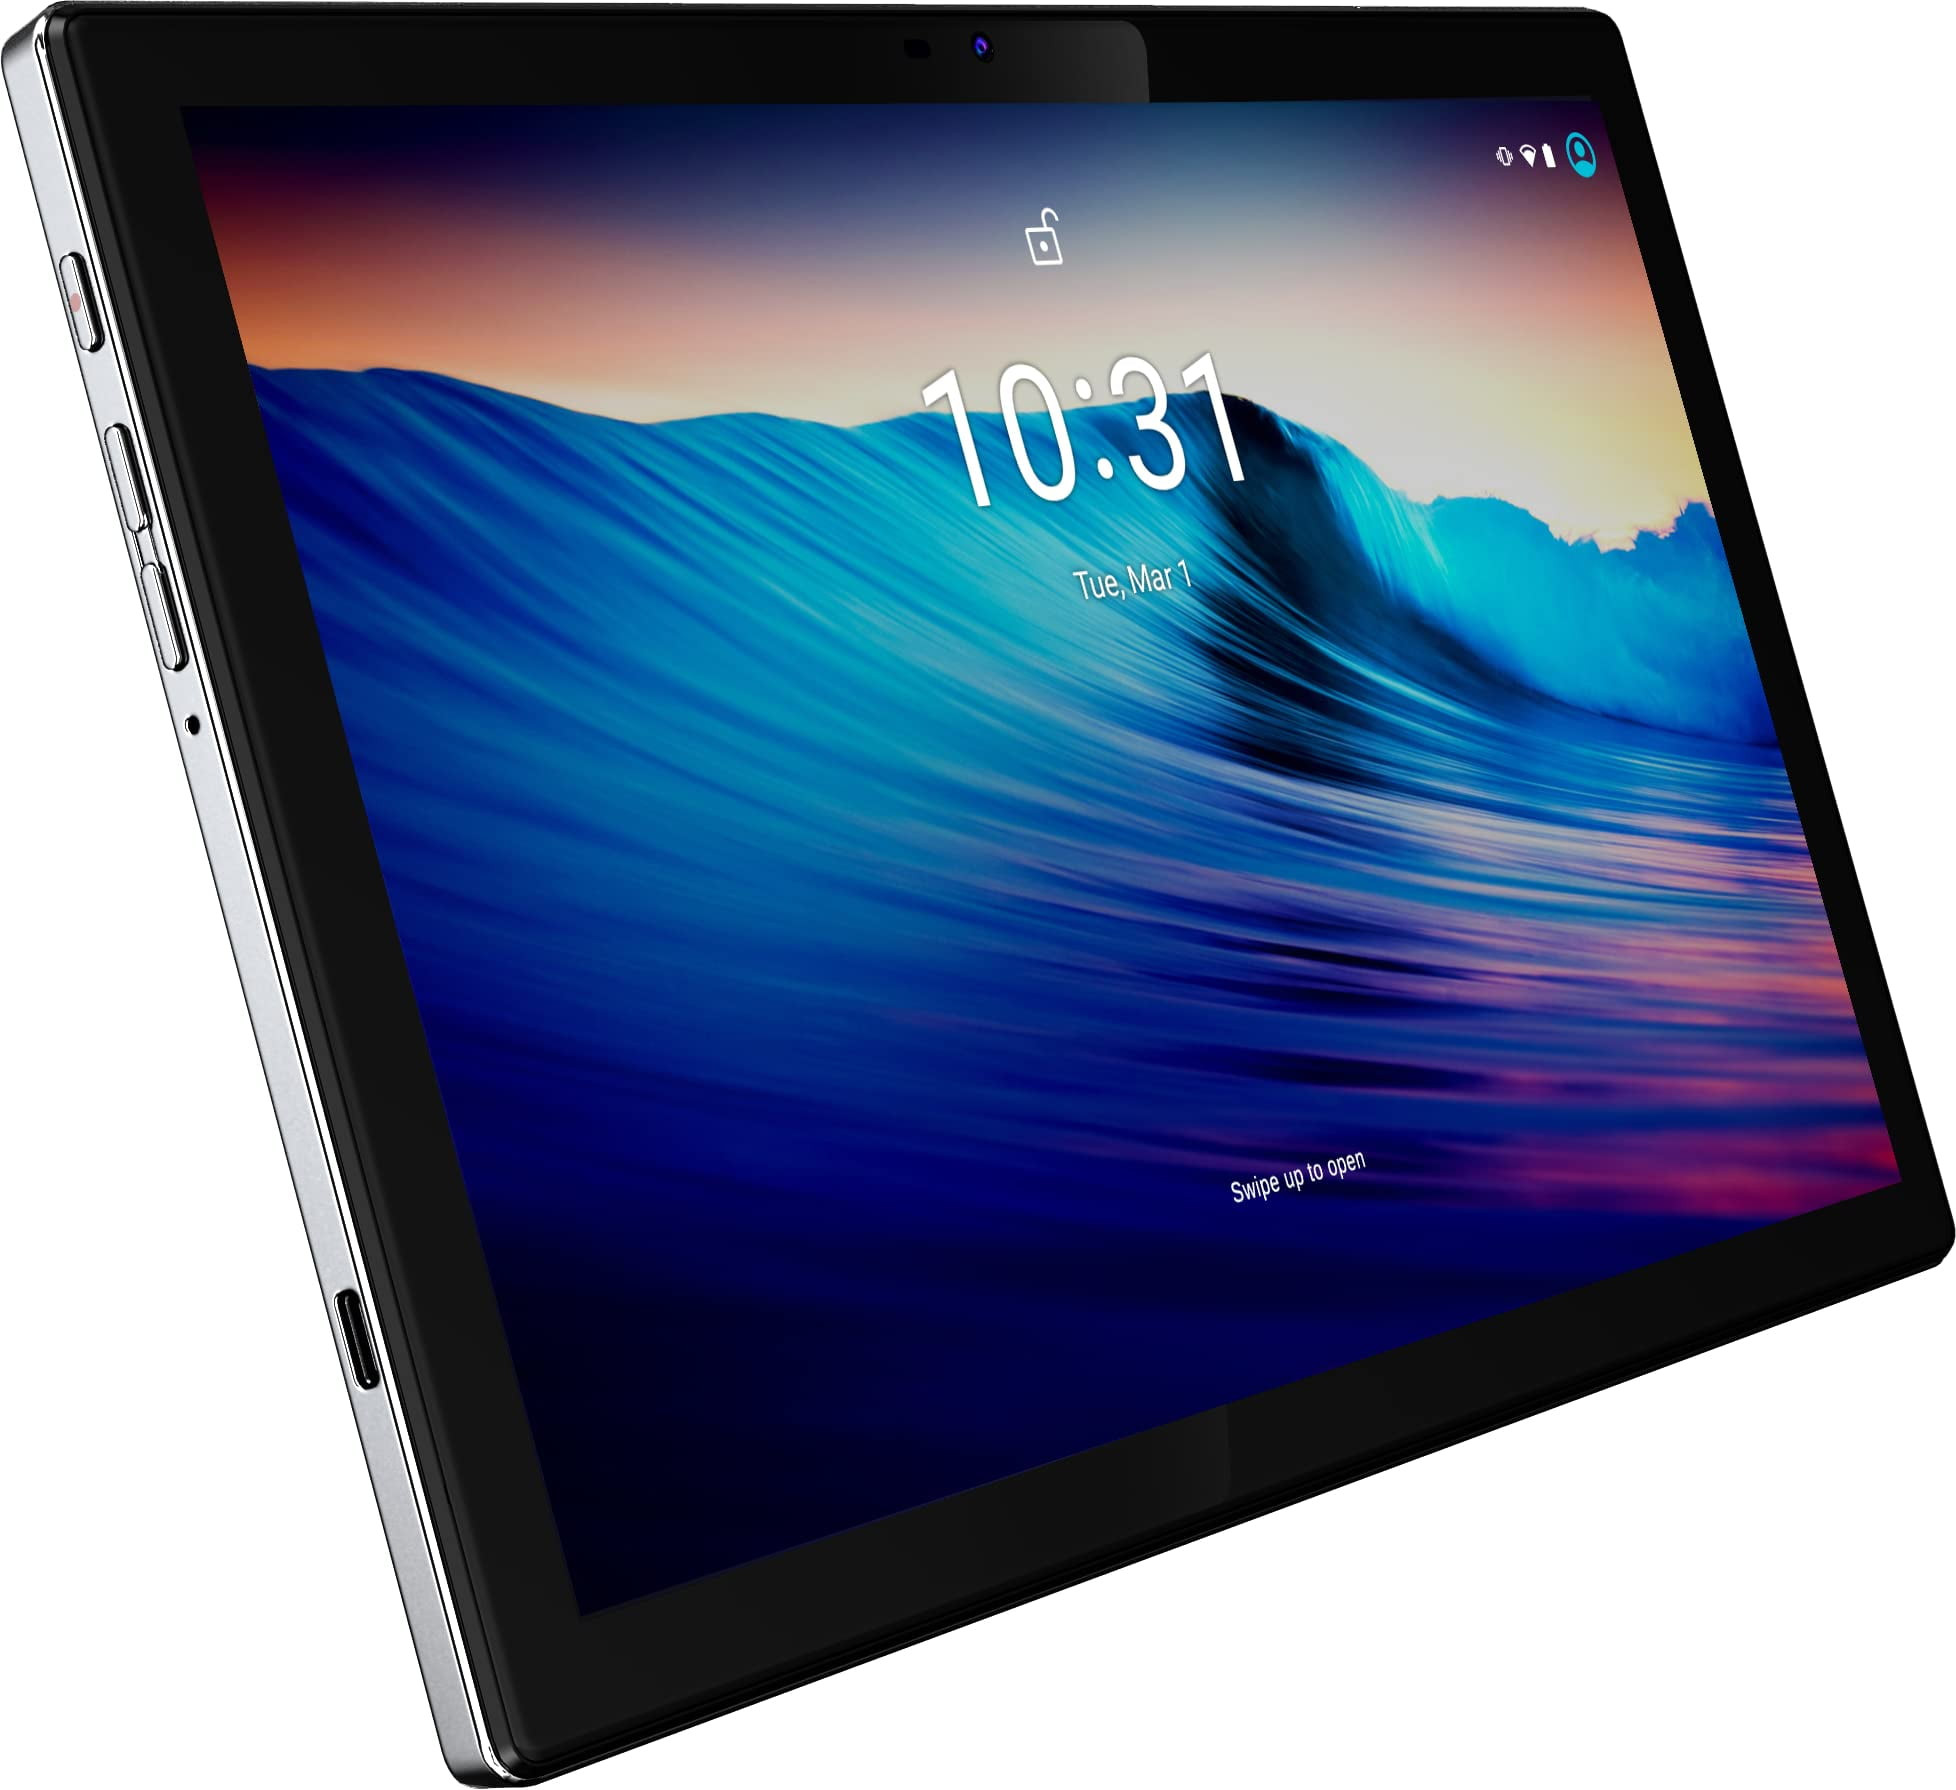 10.1 Tablet, 10 Core Processor Android Tablet, 64GB Storage 6GB RAM,  8000mAh, 1920 x 1200 HD Tablet Laptop Computer